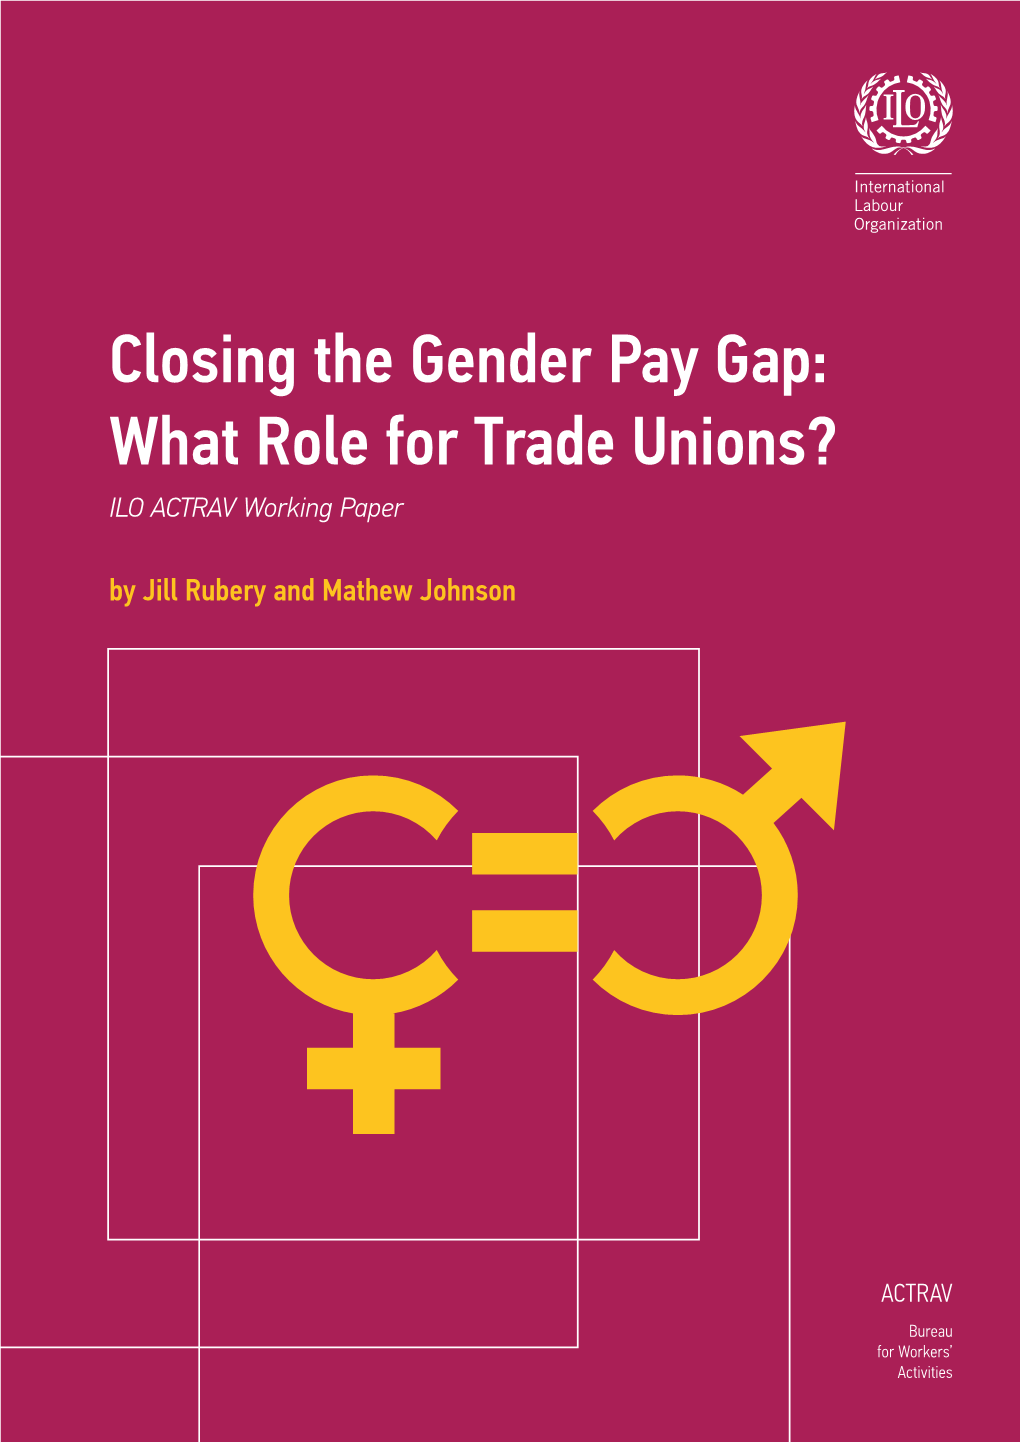 Closing the Gender Pay Gap: What Role for Trade Unions? ILO ACTRAV Working Paper by Jill Rubery and Mathew Johnson